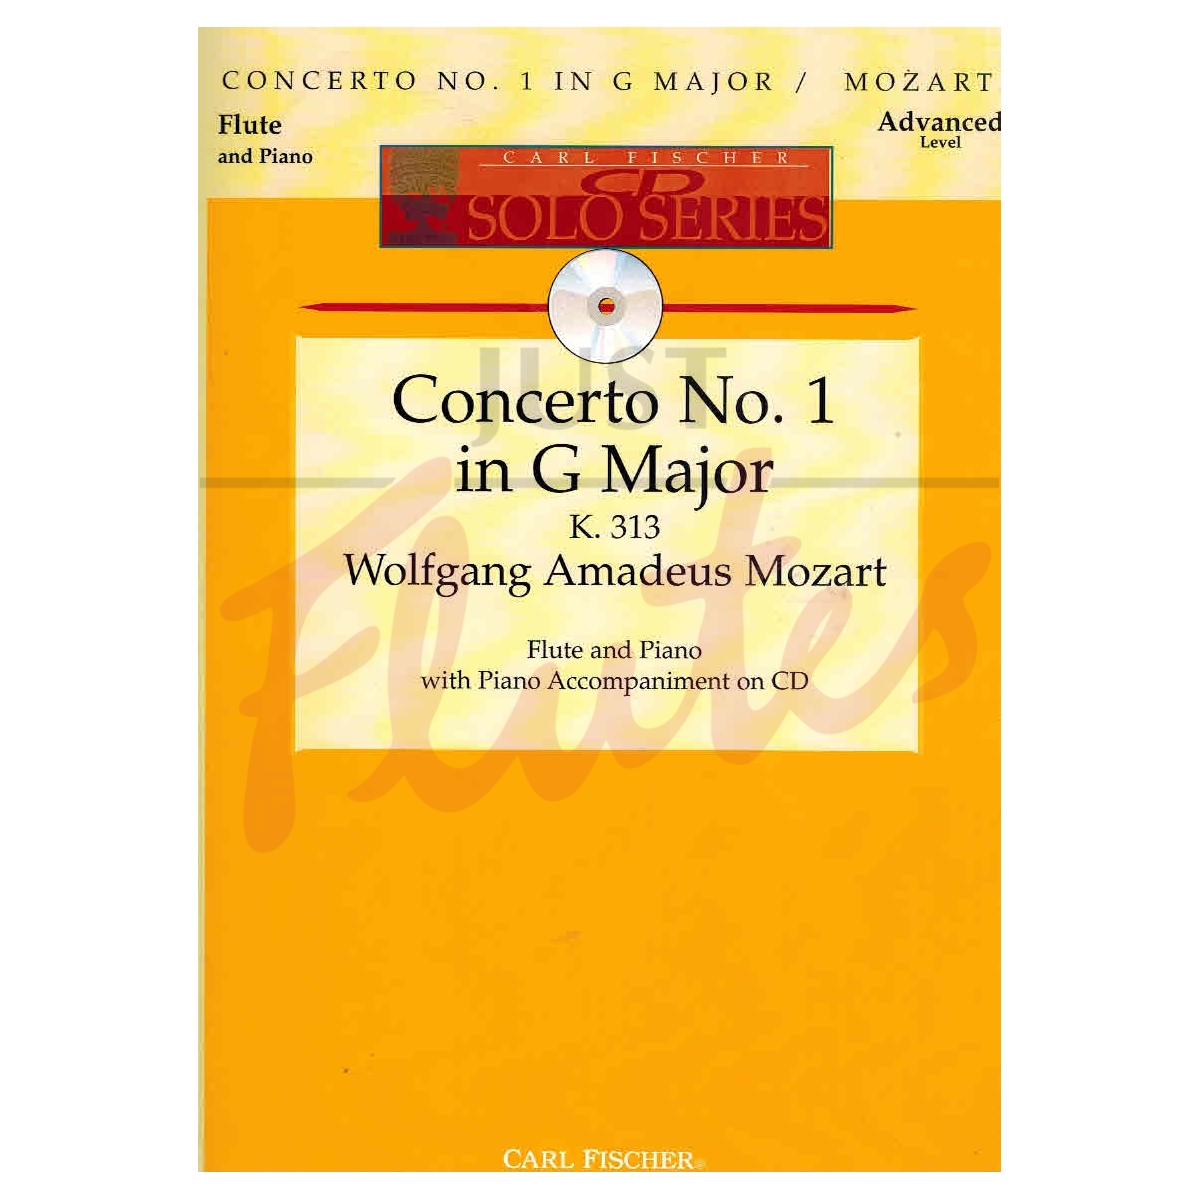 Concerto No. 1 in G major for Flute and Piano